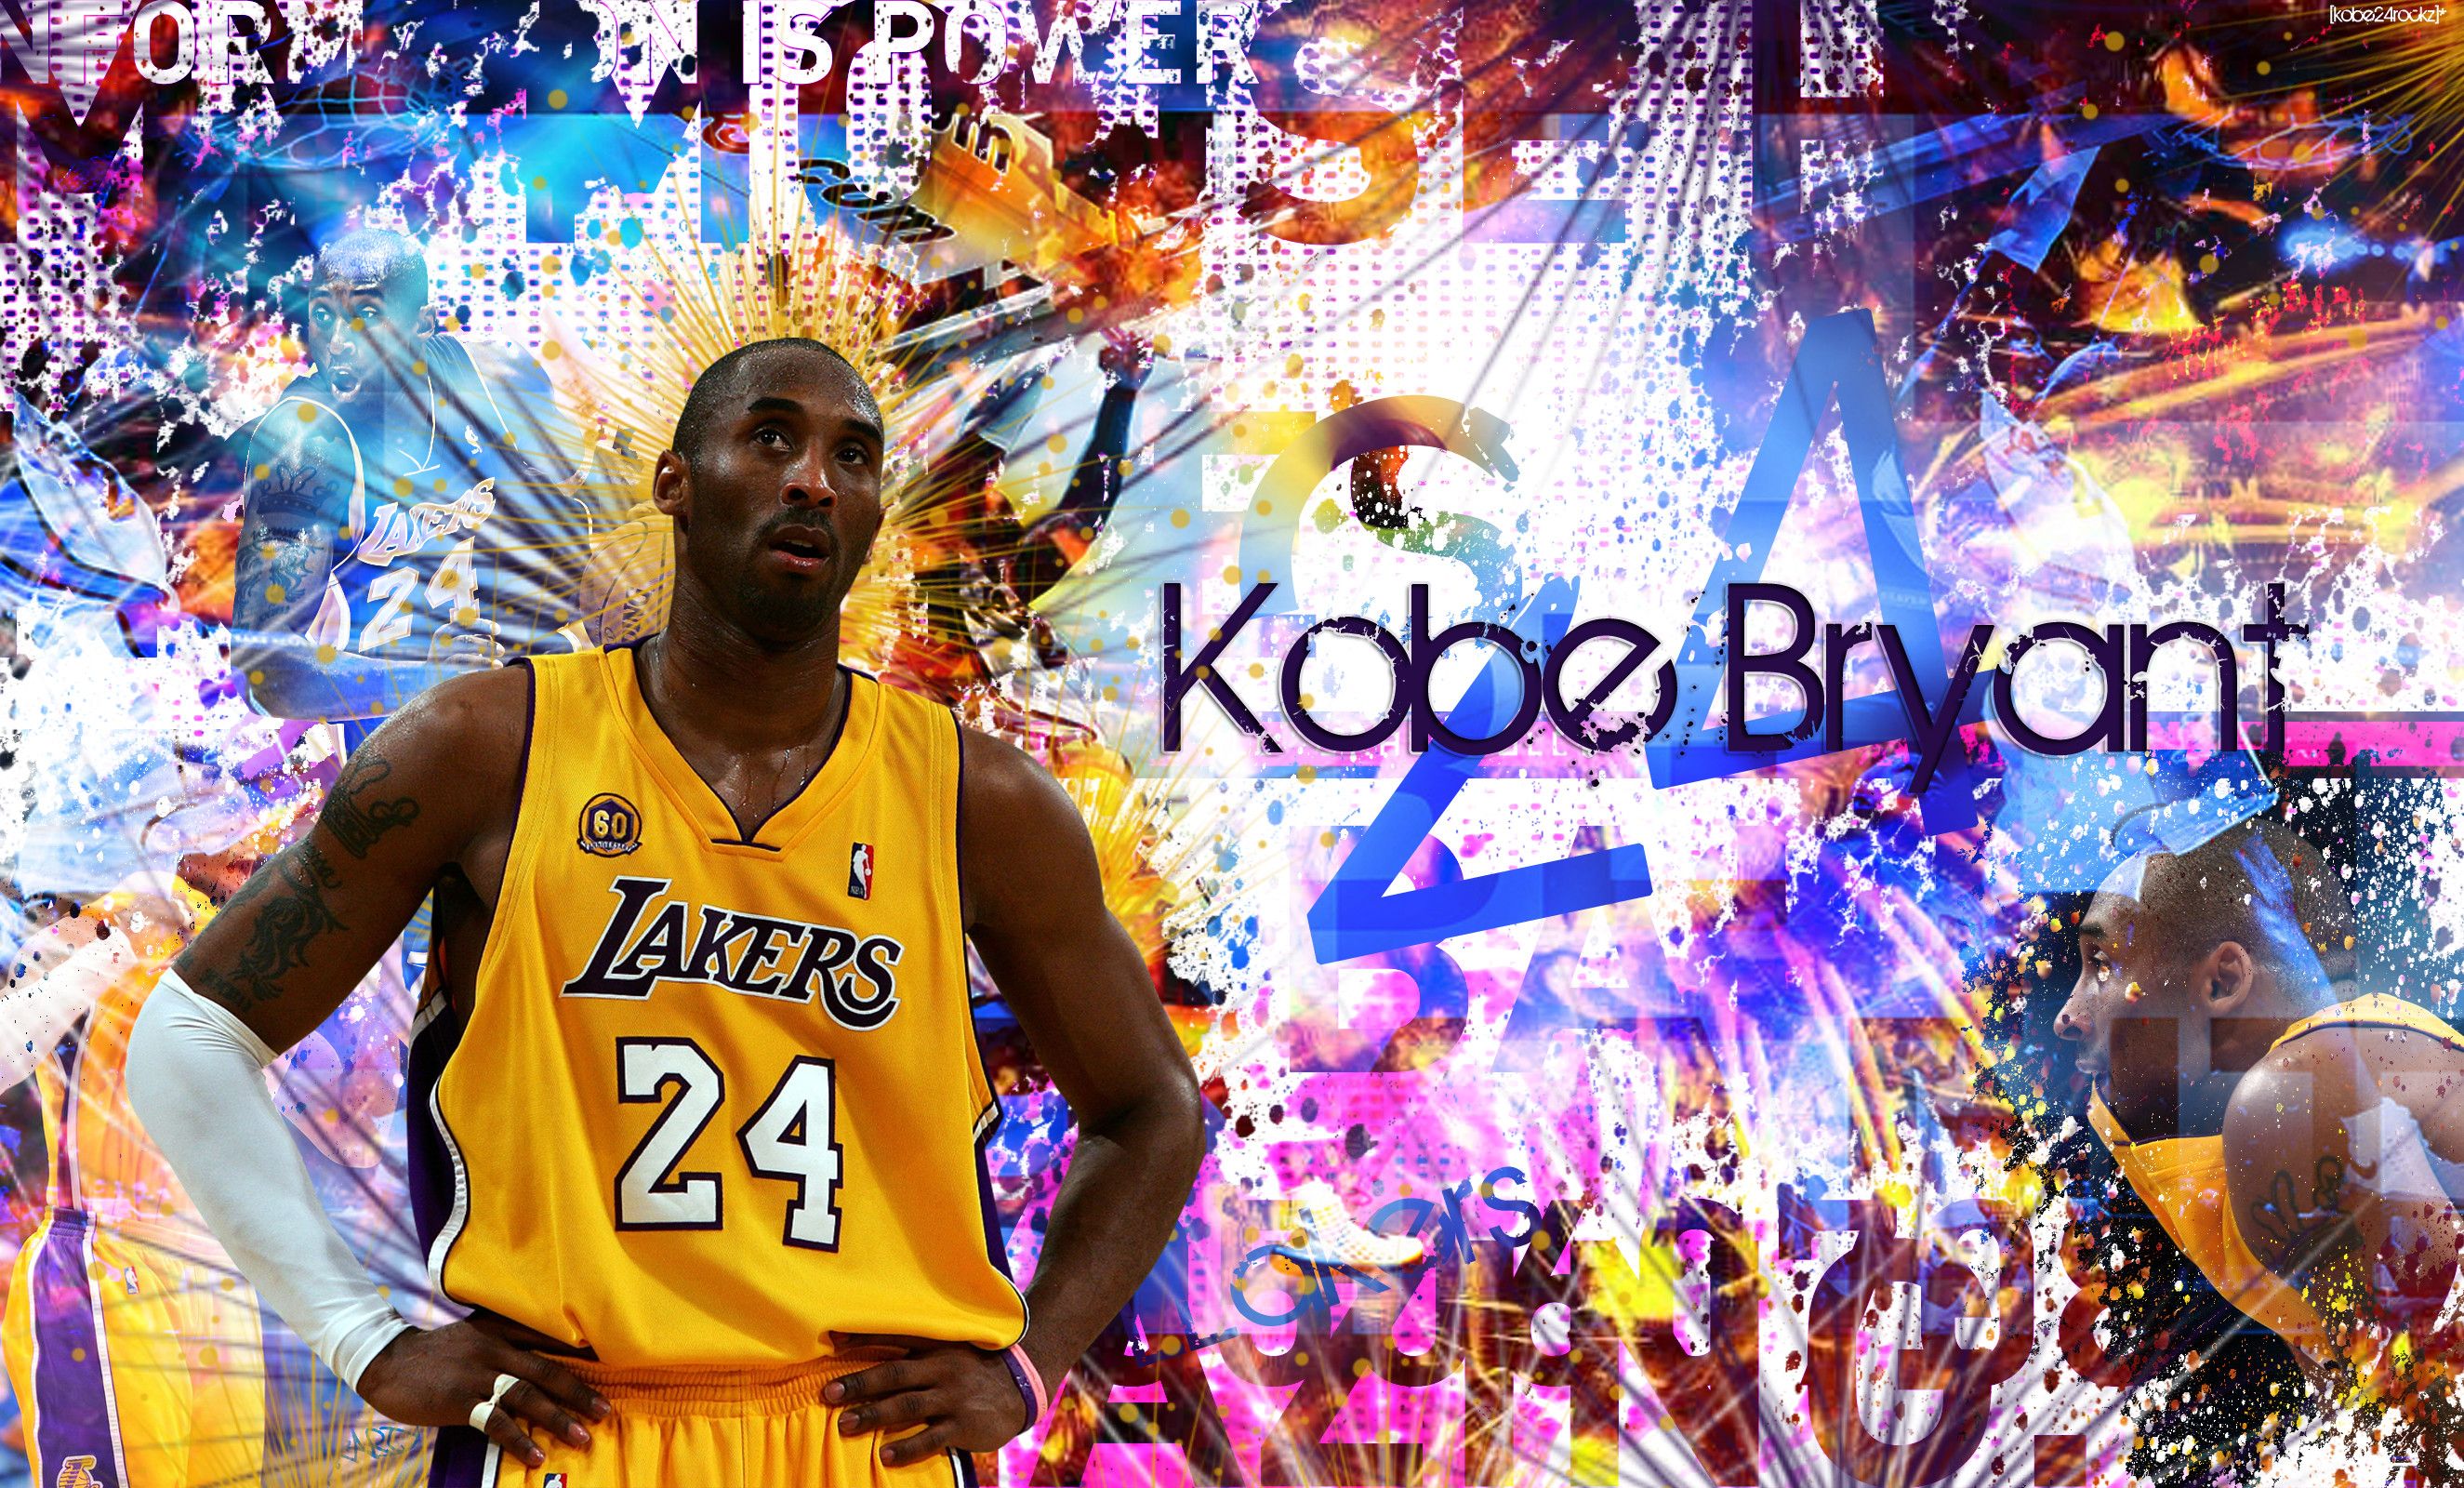 2277 Kobe Bryant Championship Stock Photos HighRes Pictures and Images   Getty Images